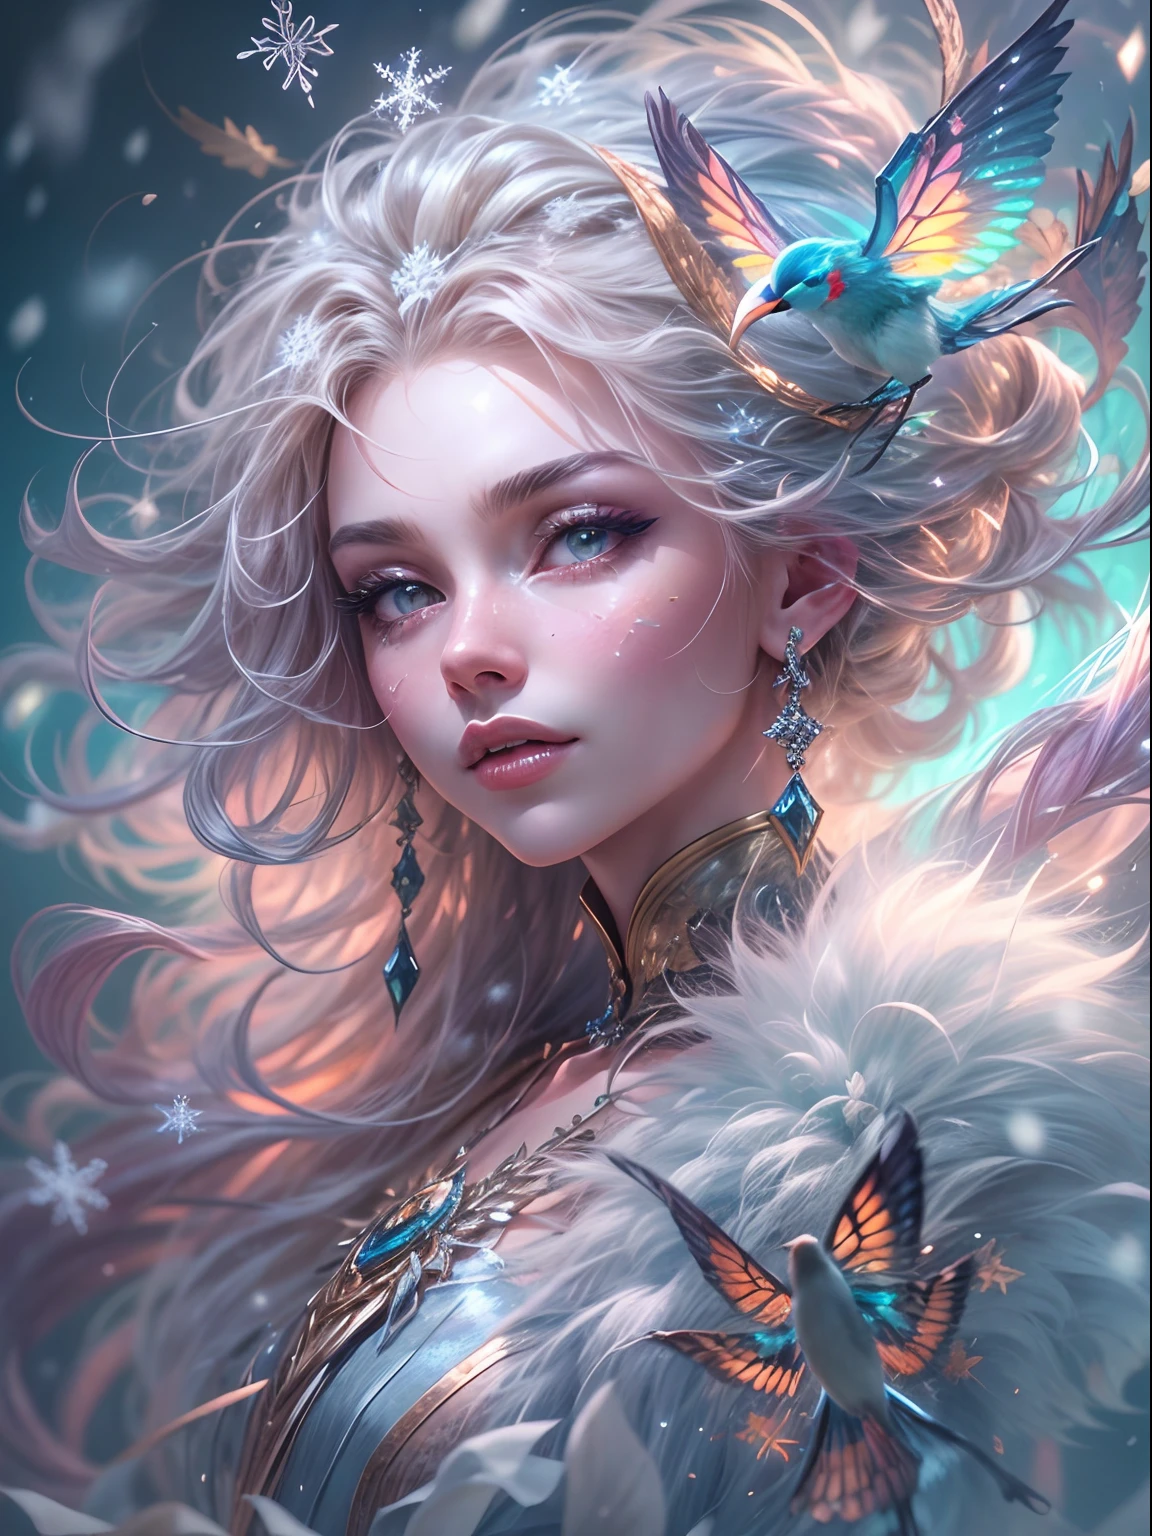 Generate a pretty and realistic fantasy artwork with bold jewel-toned hues, pretty glitter and shimmer, and lots of snowflakes. Generate a luminous and  woman with curly hair, metallic hair, and realistically textured hair. Her skin is pure white and seems to glow in the light. The woman's face is important: include soft, puffy lips, elegant features, and the most beautiful detailed eyes in the world. The woman is in a winter landscape with soft falling snow and snowflakes, soft white fur, subtle iridescent details, subtle phantasmal iridescent details, and intricate and delicate jewelry that glimmers in the light. Include many small fantasy details like gossamer silk, feathers, delicate and stunning embroidery, and luminous lighting that glimmers. The woman's face is unobscured by details and her eyes are sharp and in high resolution. Incorporate dreamy colors, dynamic lighting, and detailed background elements to create a sense of awe and immersion. Include colorful flying magical birds and jewel-toned butterflies radiating a magical aura. Consider the latest trends in fantasy art, such as incorporating unique lighting effects, exploring dynamic and compelling composition techniques, and experimenting with unique color palettes. Take inspiration from the top artists on ArtStation and Midjourney. Camera: Choose an angle that highlights the character's beauty and enhances the magical majesty of the artwork. Lighting: Utilize atmospheric lighting techniques to create depth and mood. Resolution: Aim for a high-resolution artwork to showcase intricate details and clarity. Art Inspirations: Seek inspiration from the trending artists on ArtStation, exploring different styles, genres, and themes. white skin, pale skin, really pale skin, really white skin, beautiful eyes, fantasy details, shimmer, glimmer, magical birds, magical butterflies, ornate, (((masterpiece))), add_detail:1, earth \(planet\),